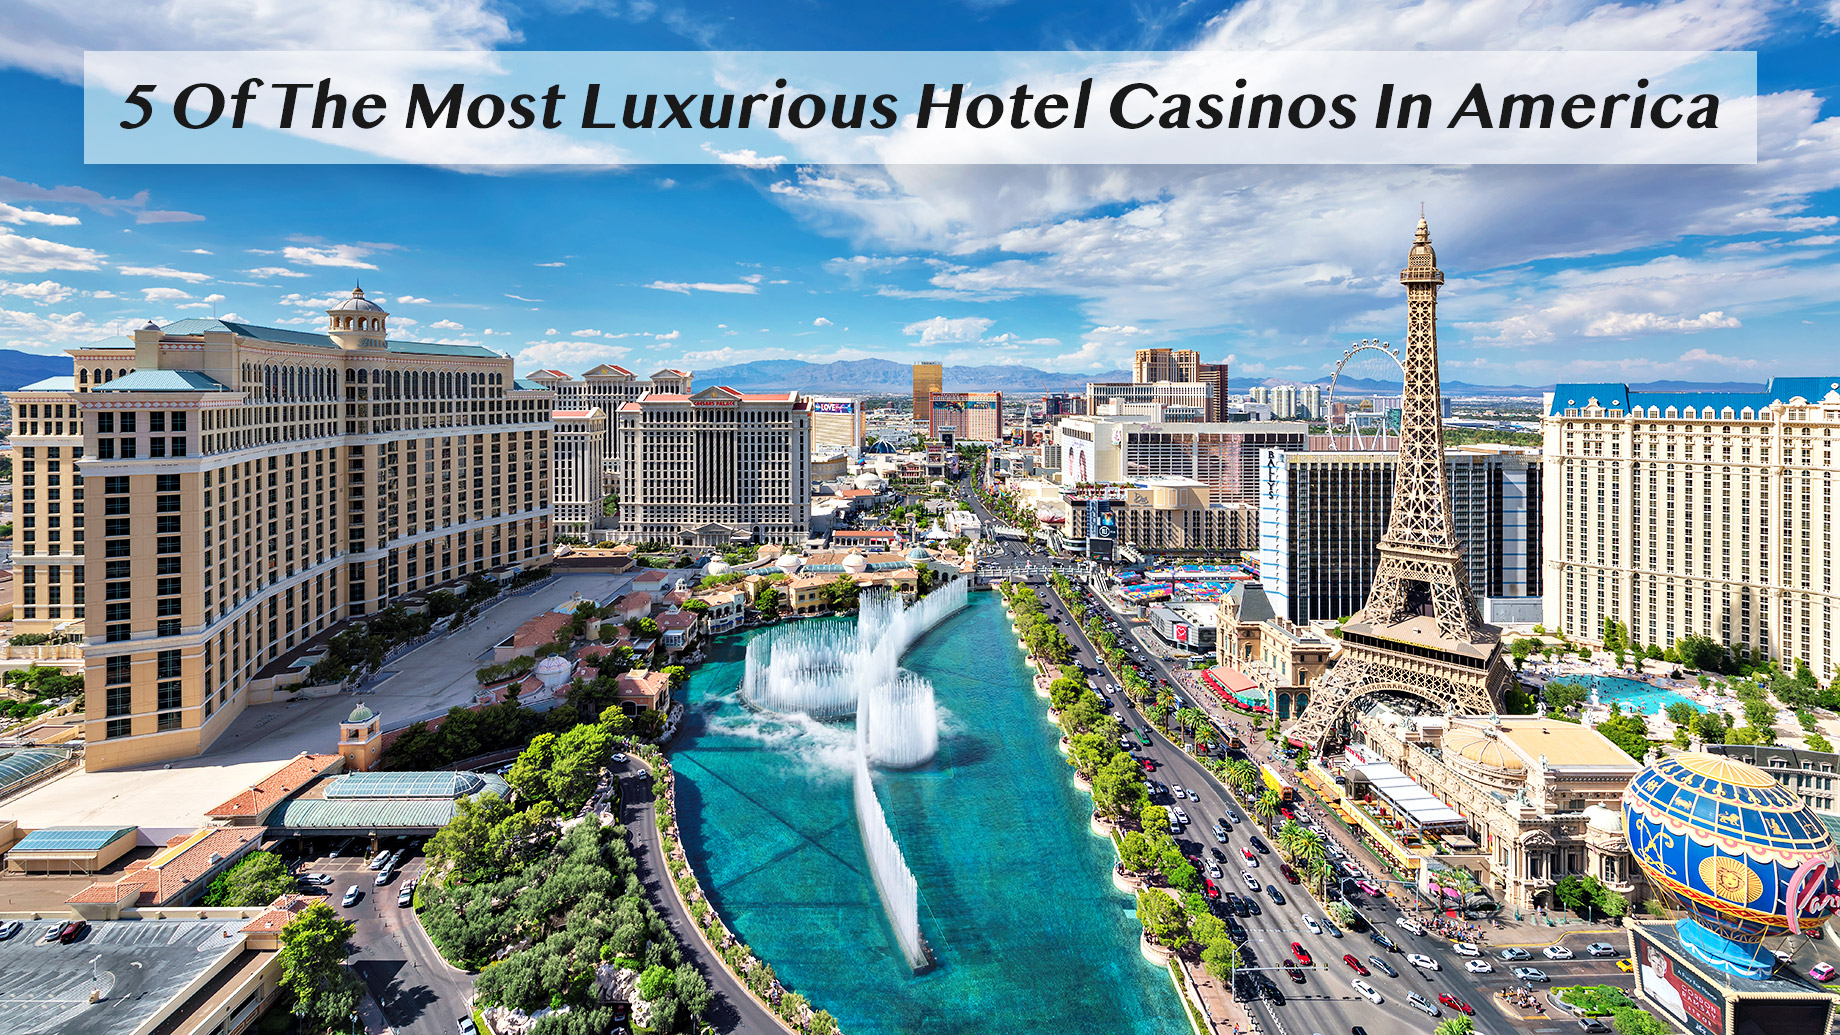 5 Of The Most Luxurious Hotel Casinos In America